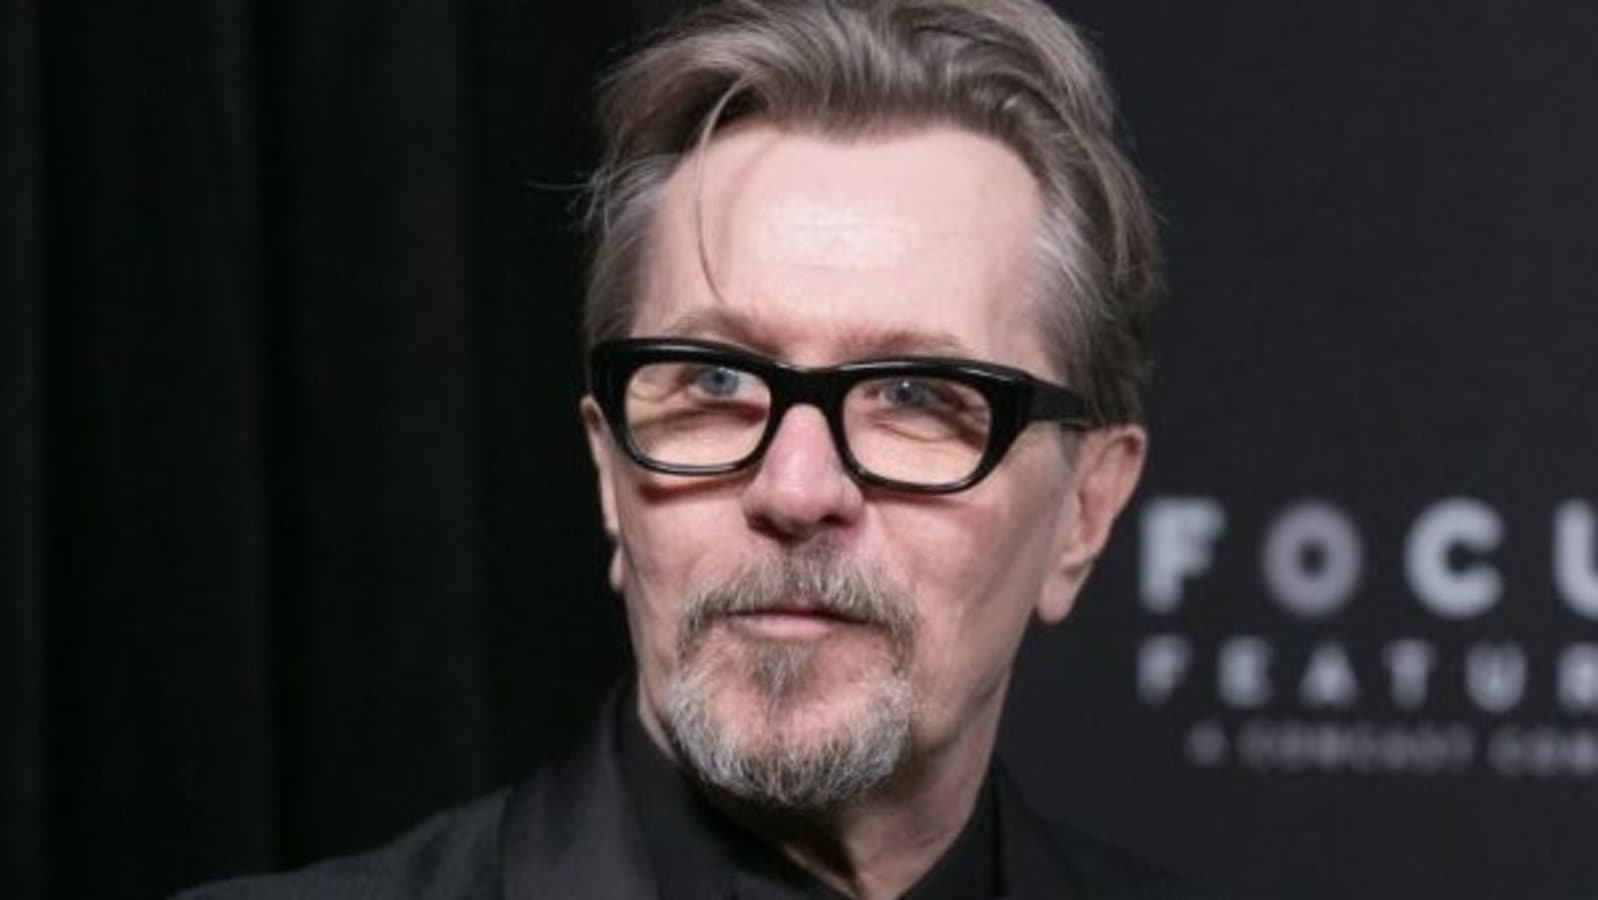 Gary Oldman says he wants to retire from acting in near future